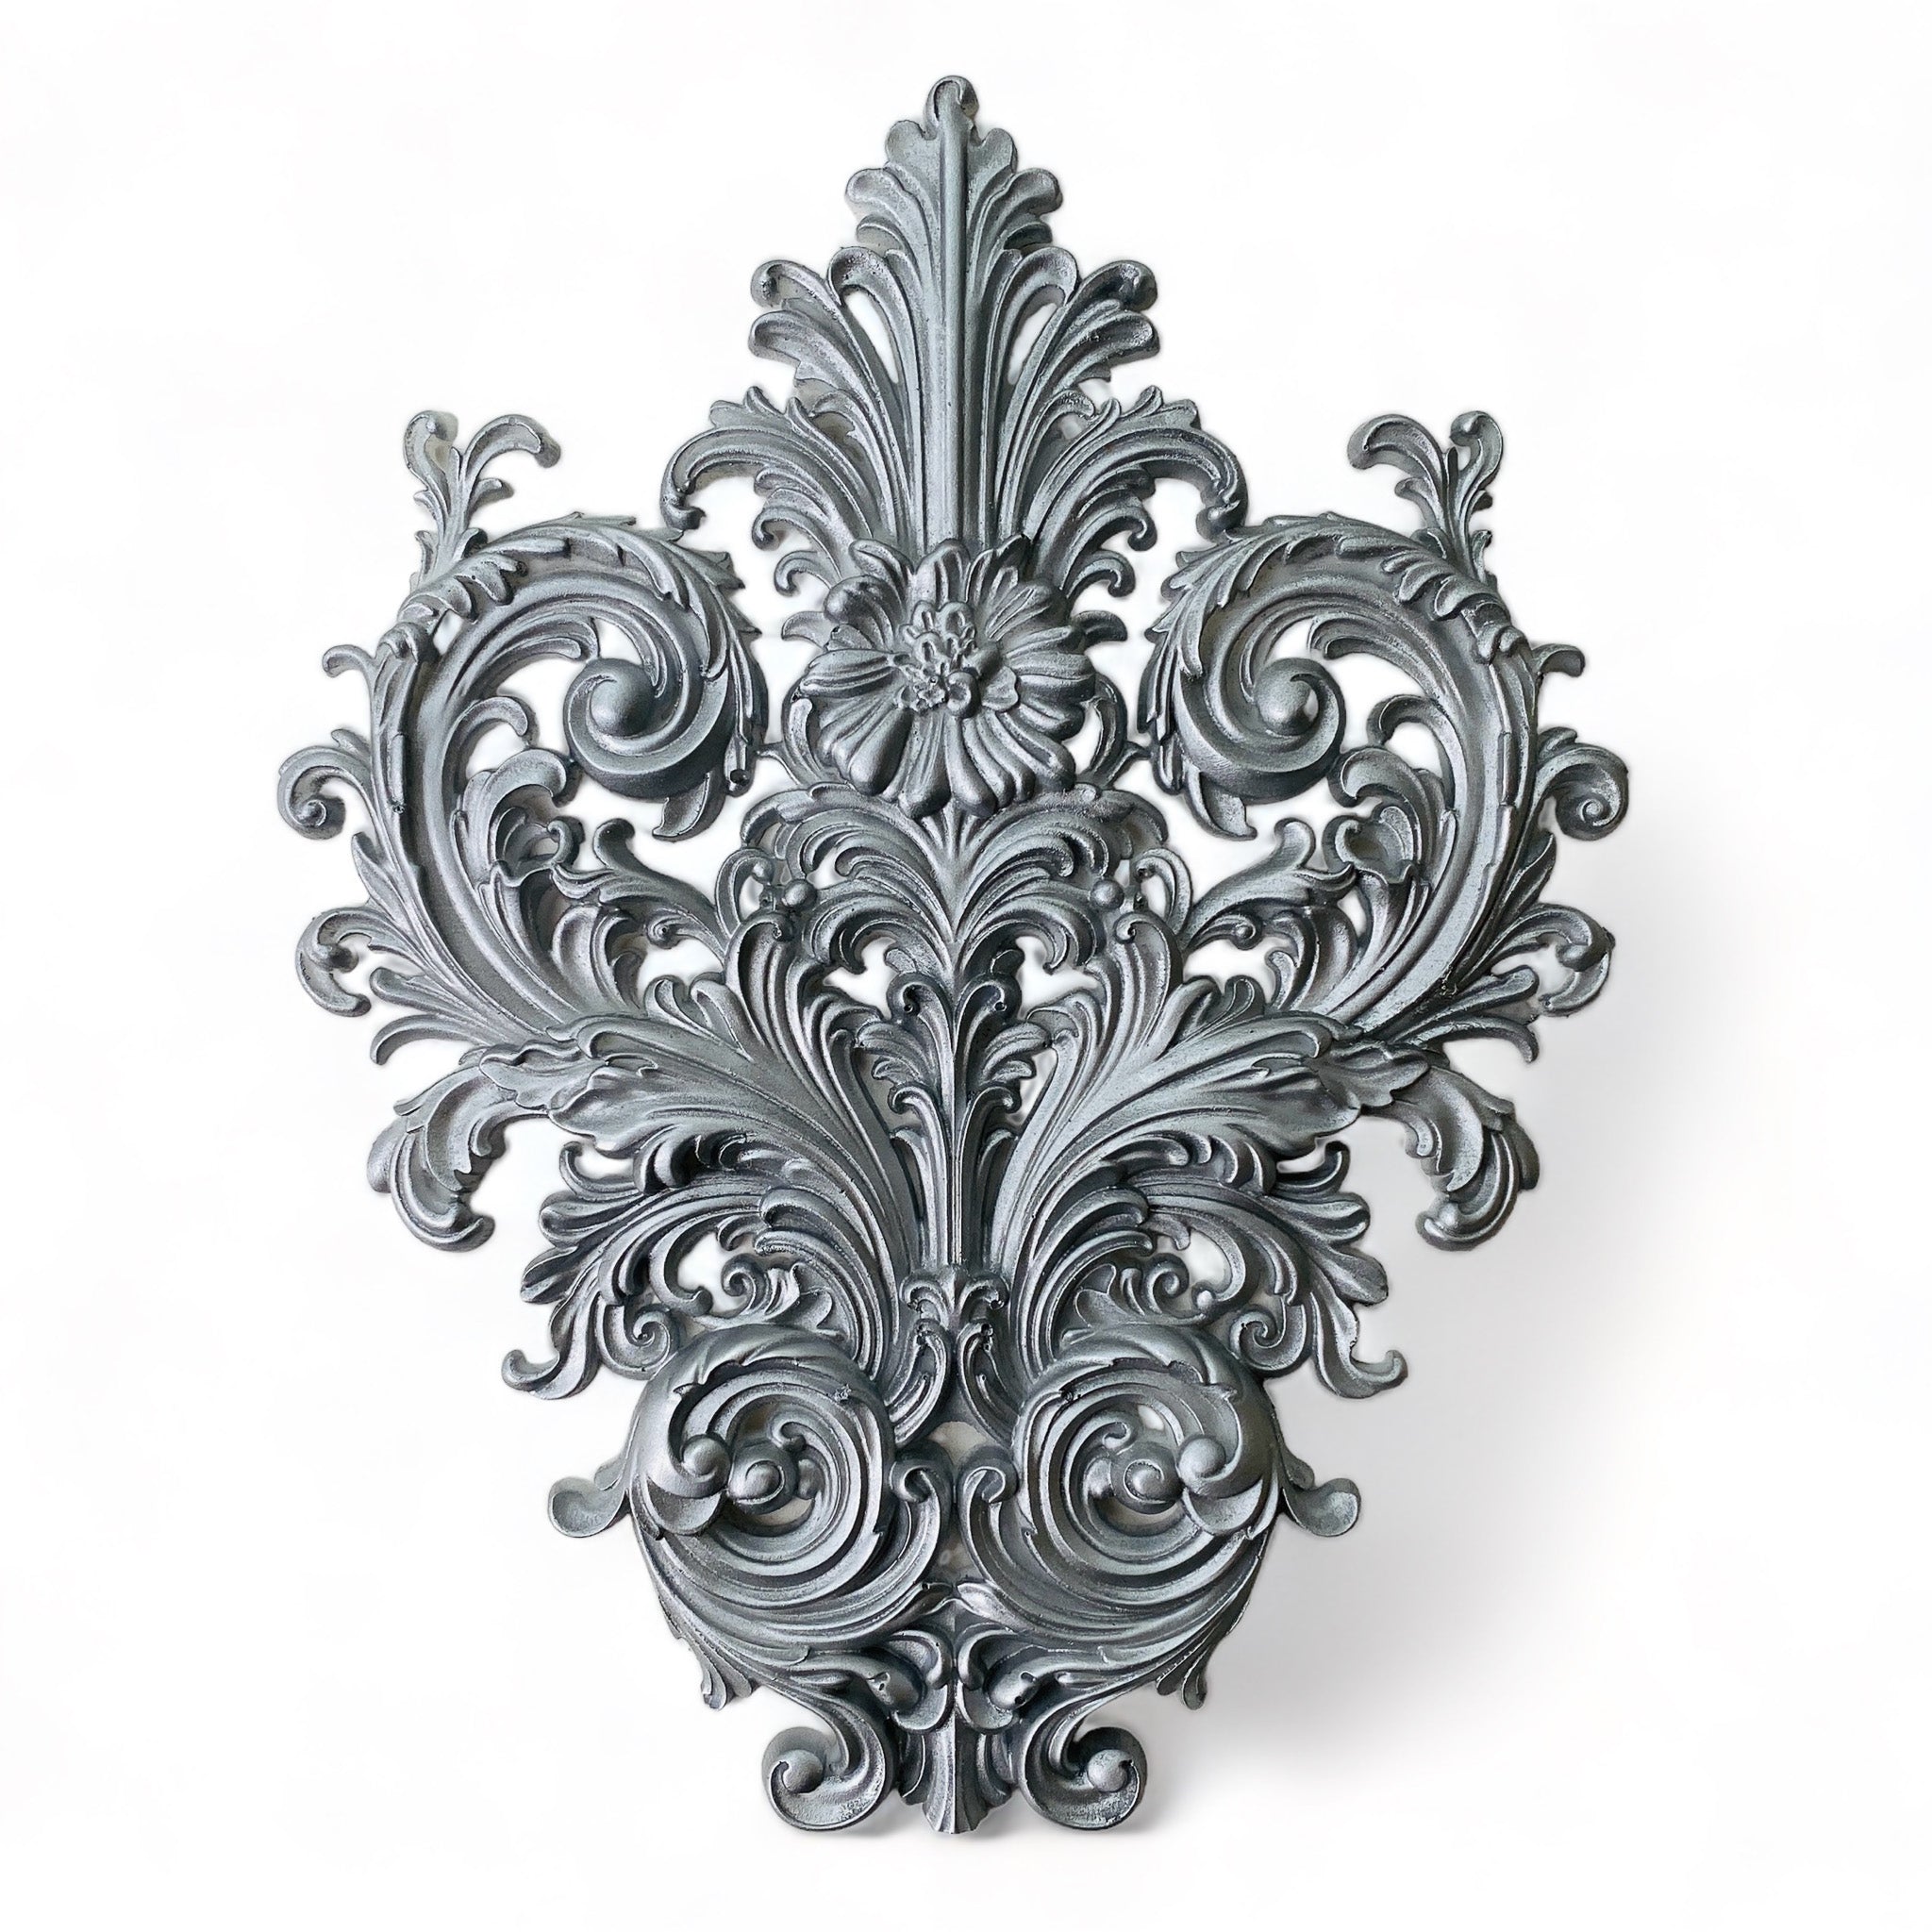 A silver-colored silicone mold casting of an ornate leaf scroll design is against a white background.